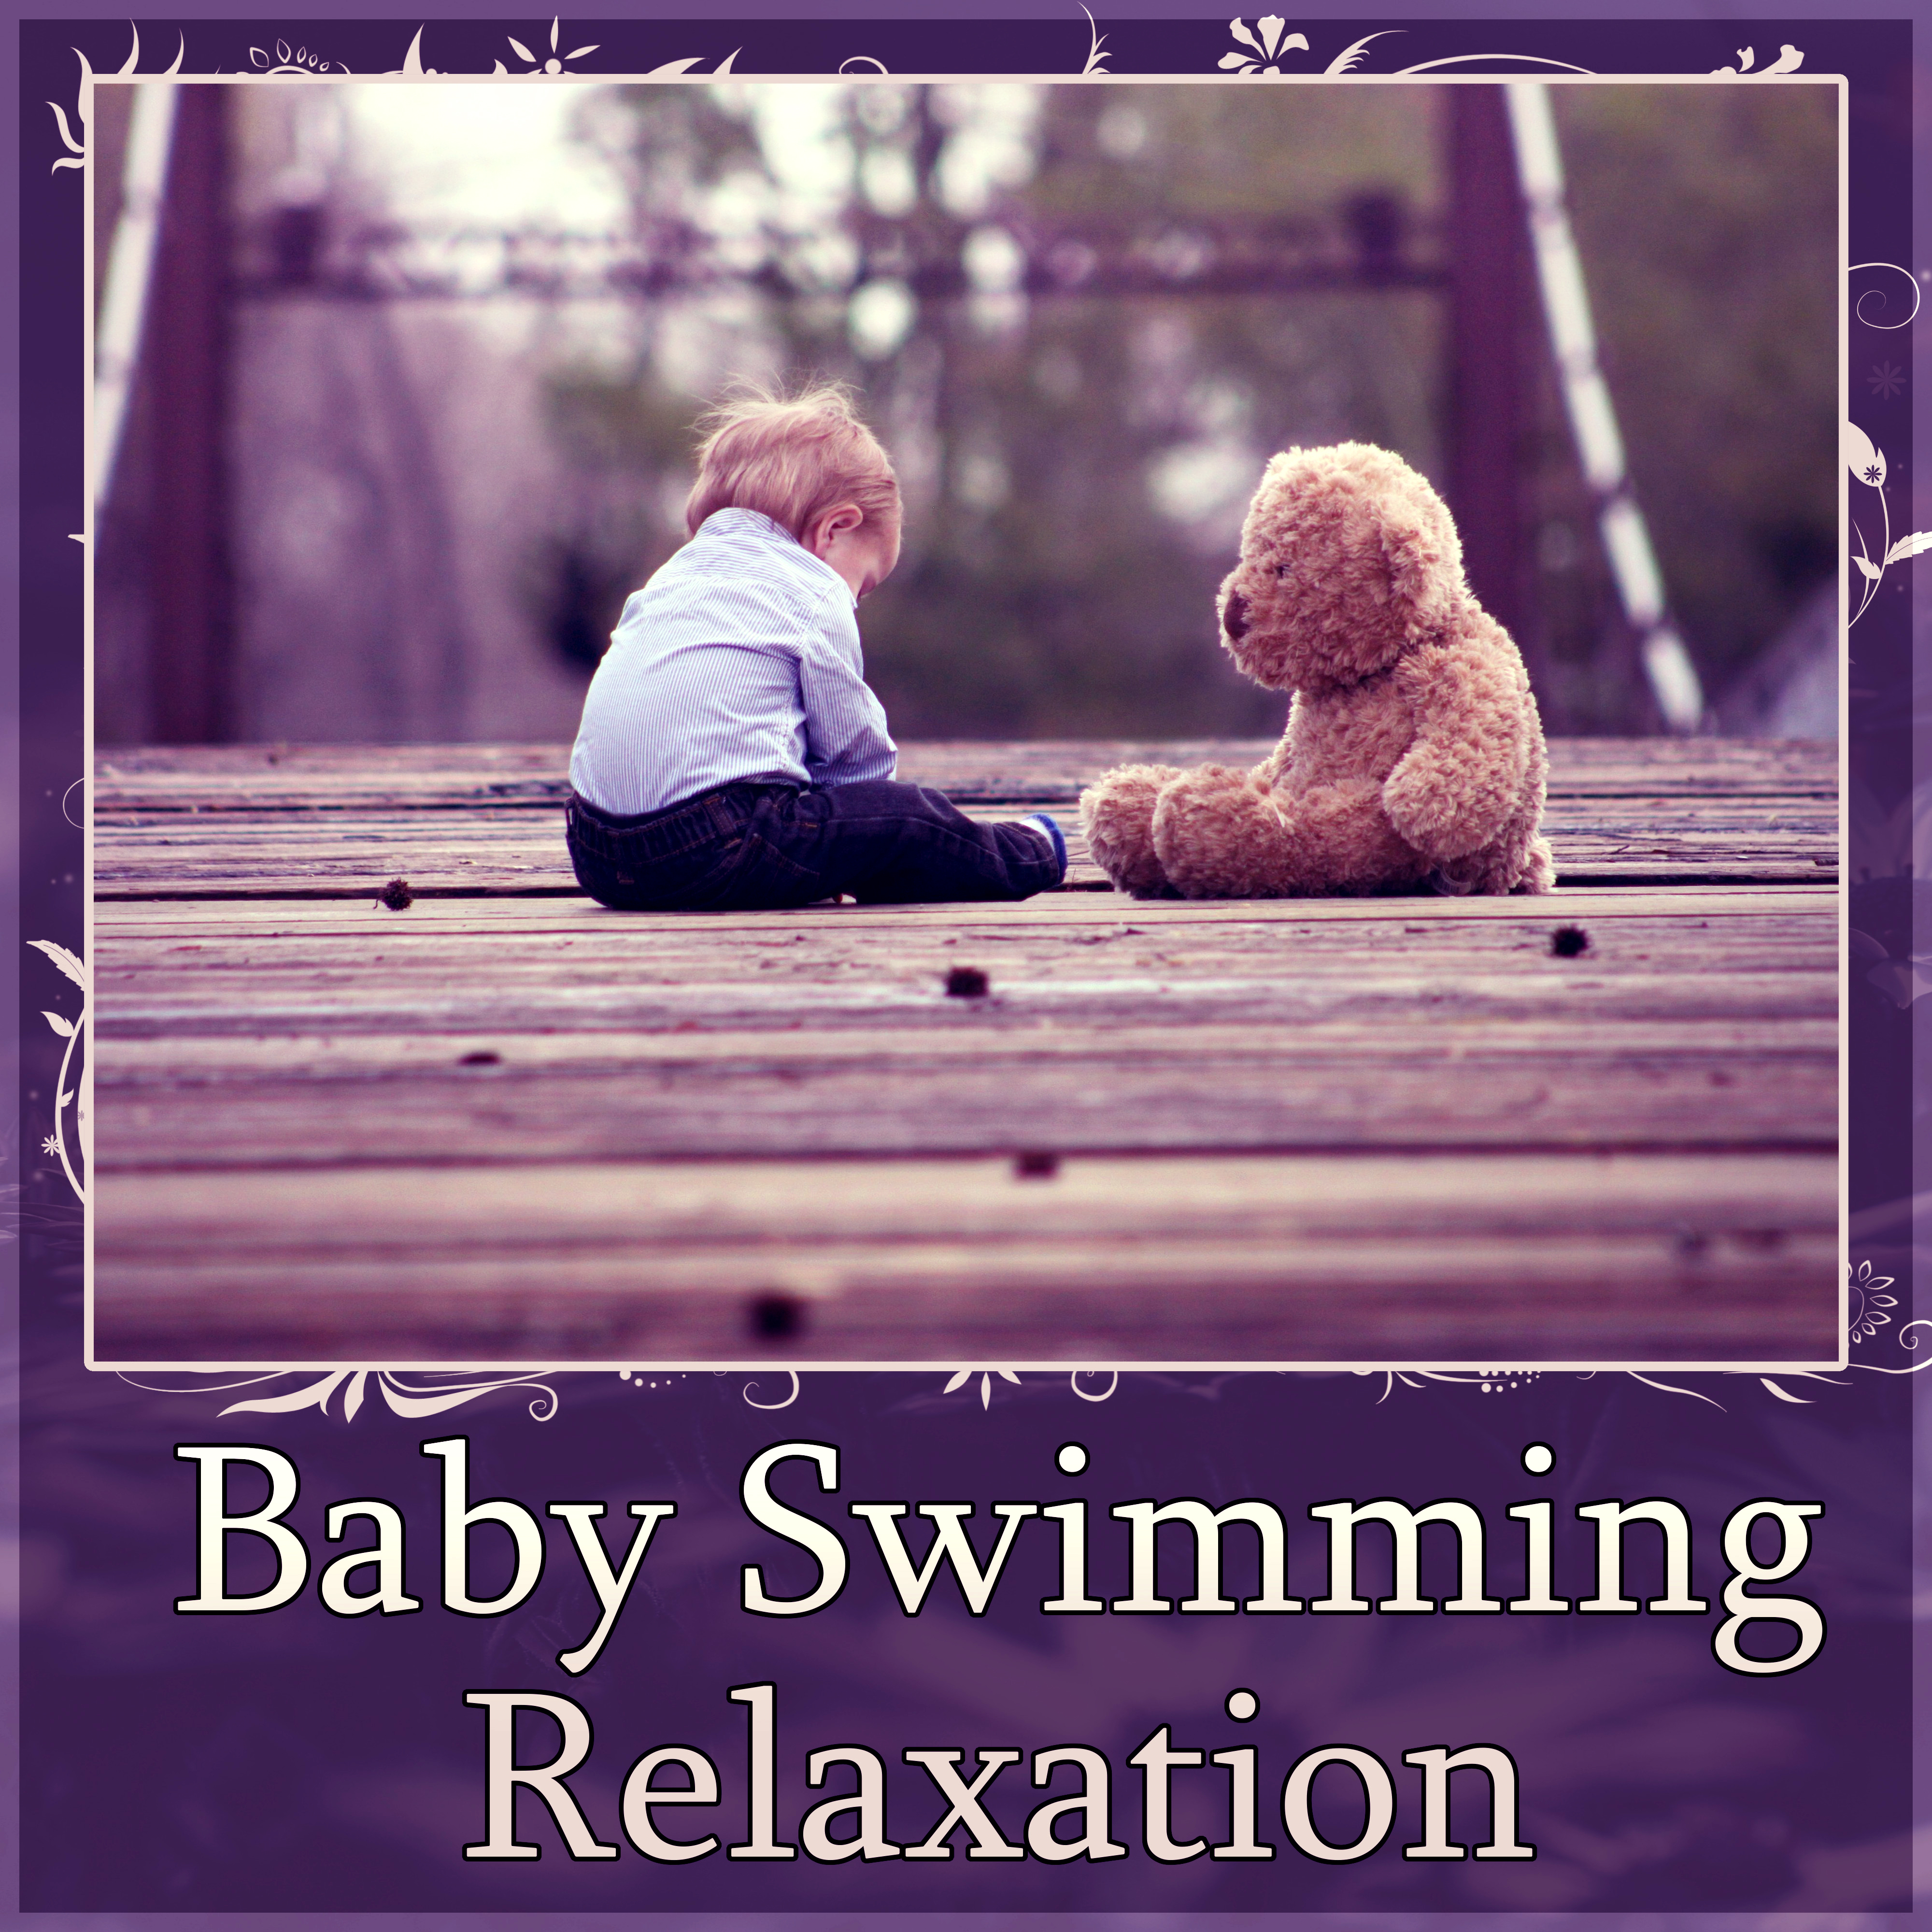 Baby Swimming Relaxation - Calm Baby, Teach Yourself Doing Gentle Massage, Back to Basics, Relaxing Music for Bath Time